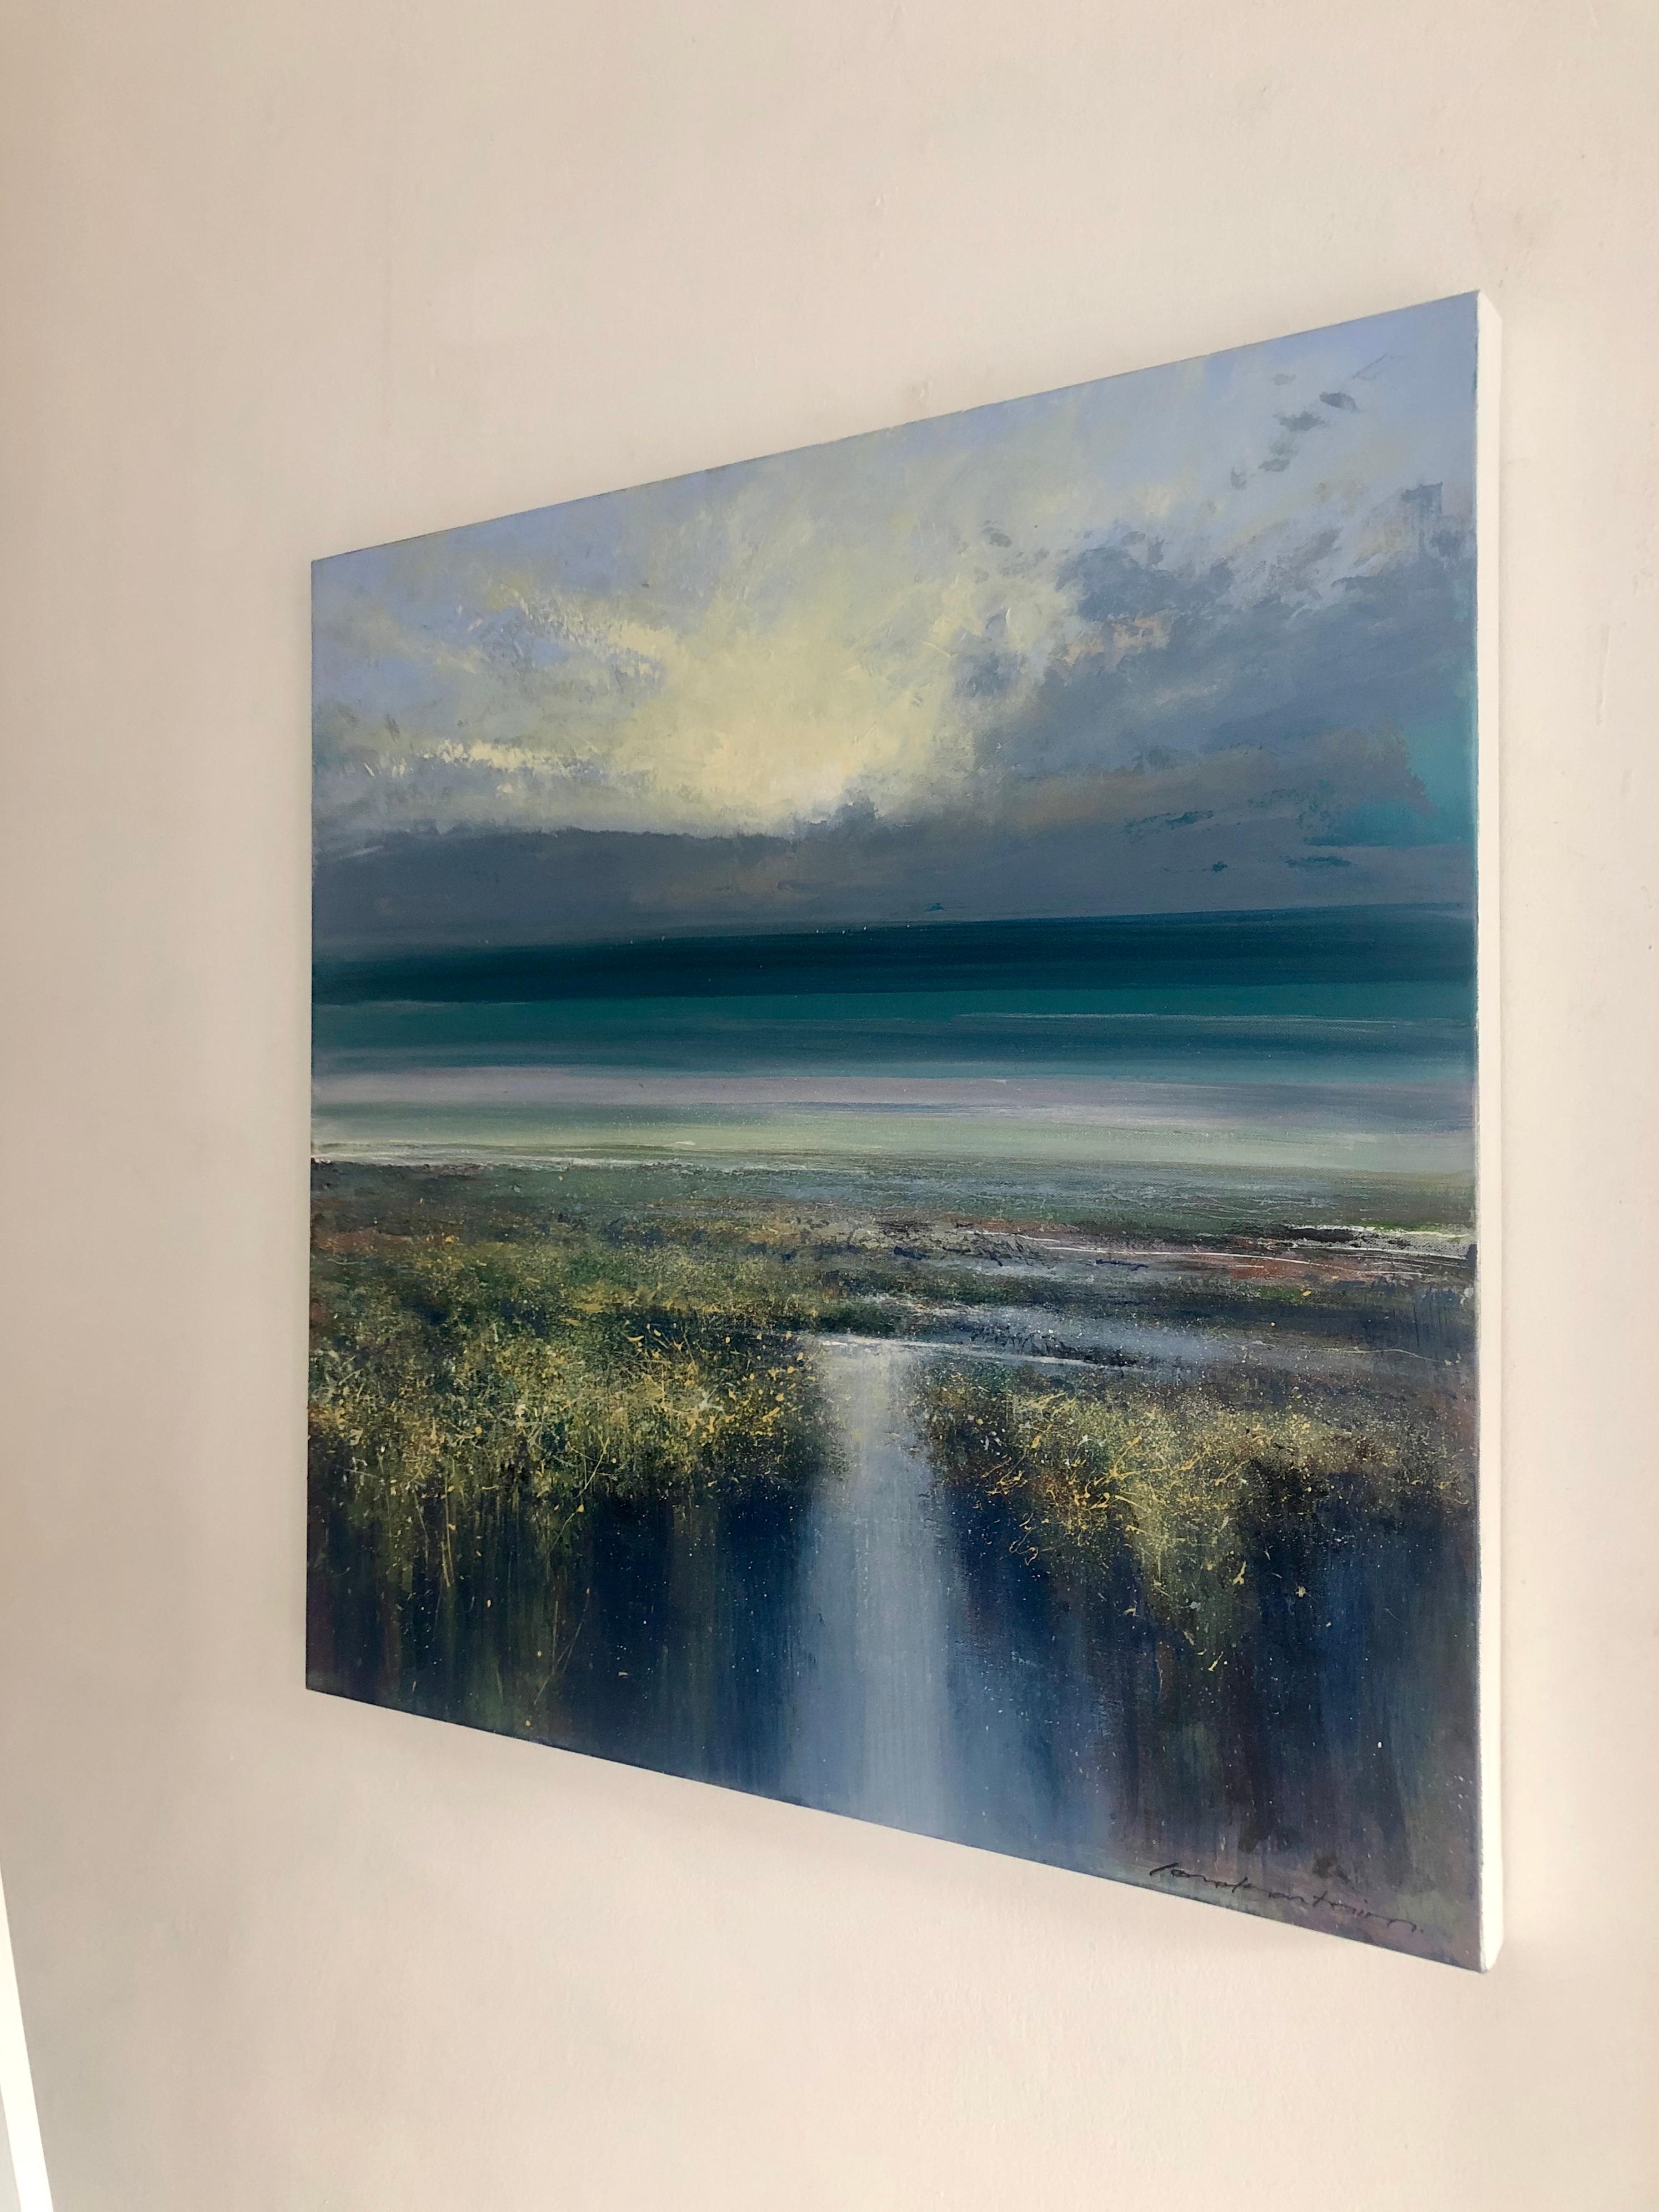 Estuary Evening - water seascape painting Contemporary 21st C modern art sky - Gray Landscape Painting by Jonathan Trim